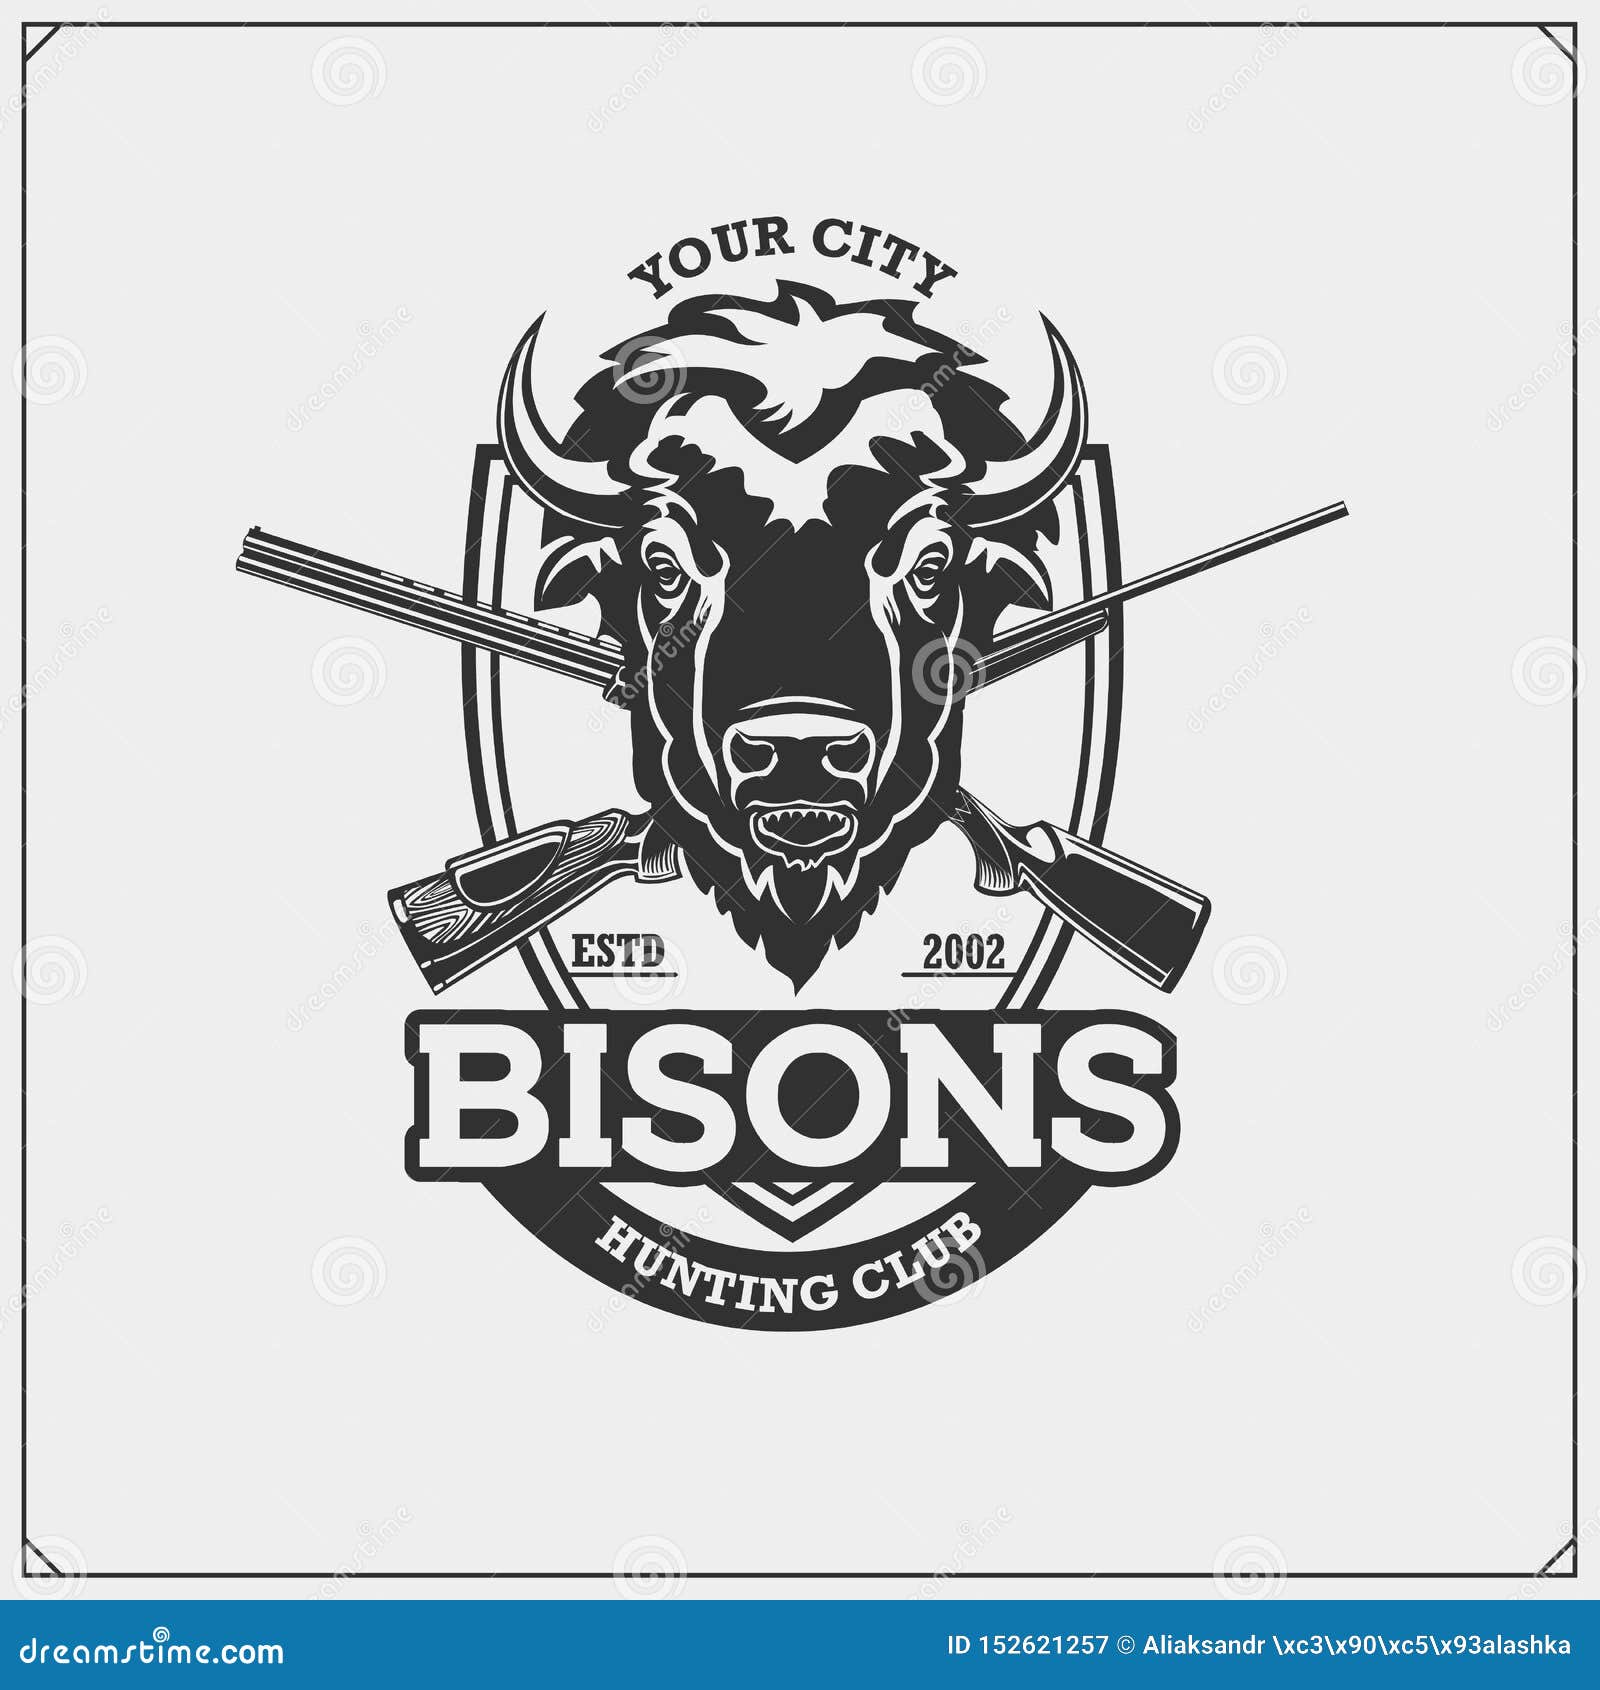 Hunting Club  Emblem With Bison And Crossed  Rifles  Stock 